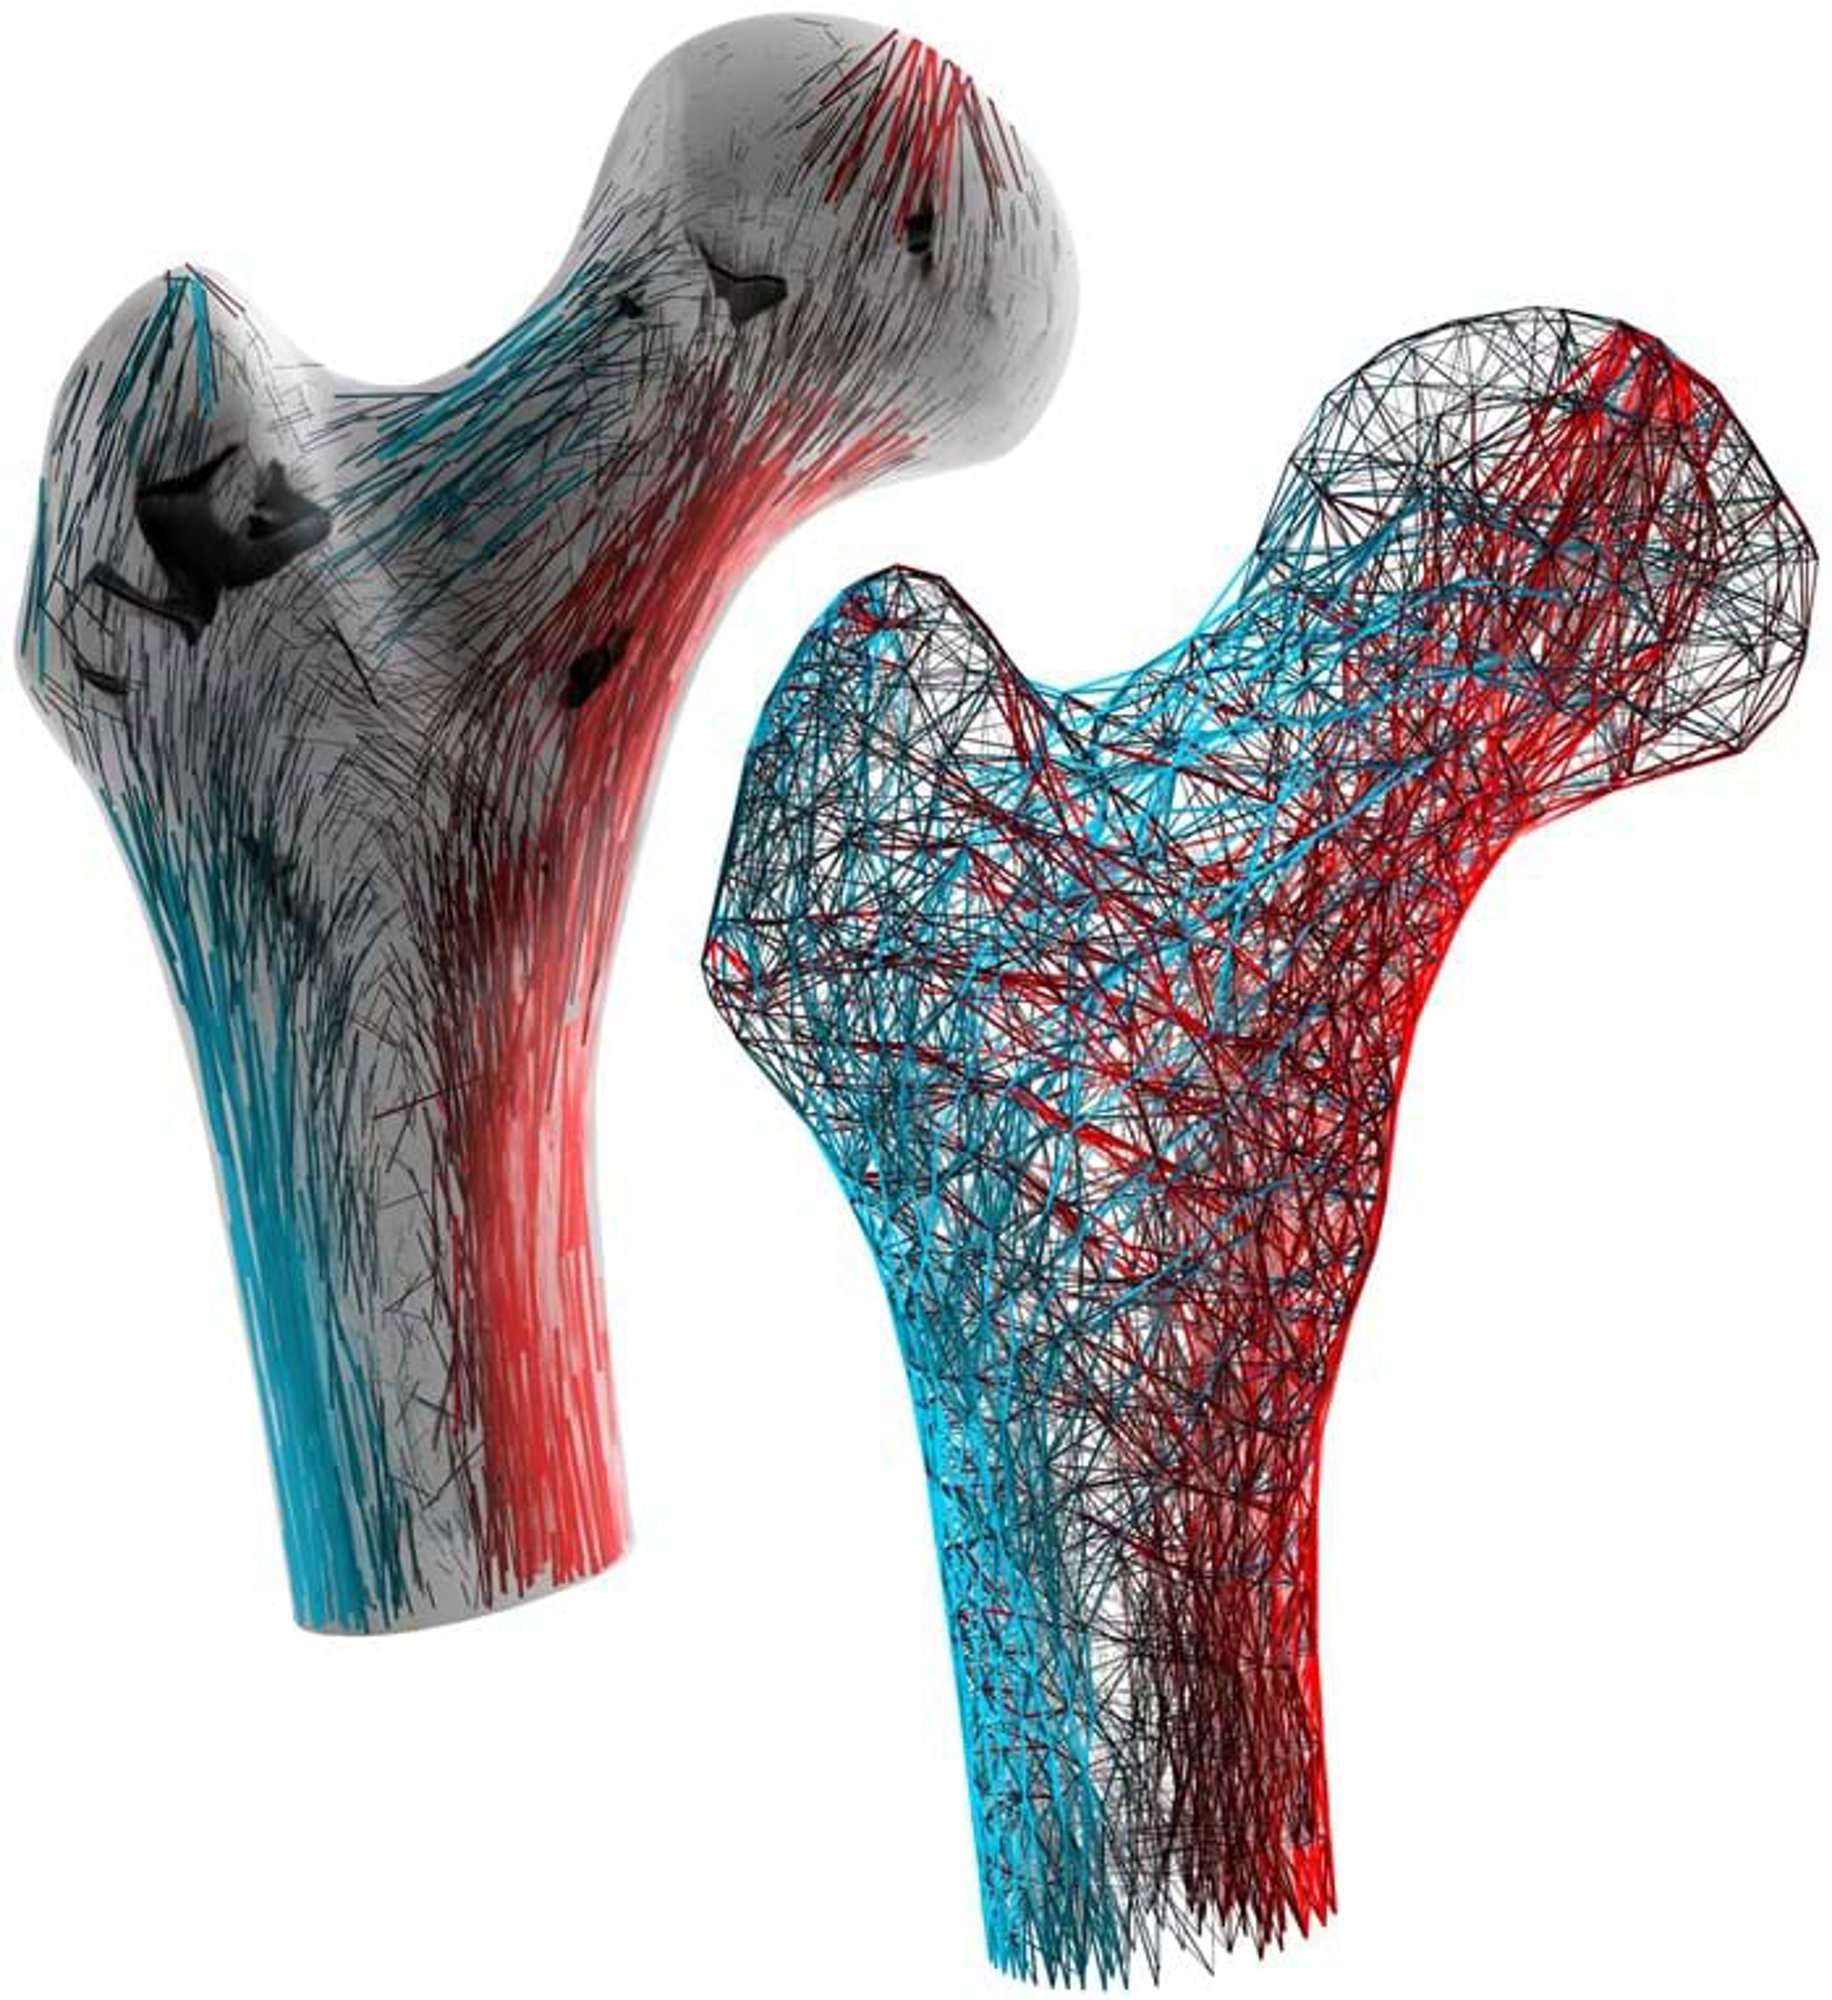 A visualisation of stress alignment in bone structures by Alessandro Felder for his PhD at the Royal Veterinary College in London.
© Alessandro Felder